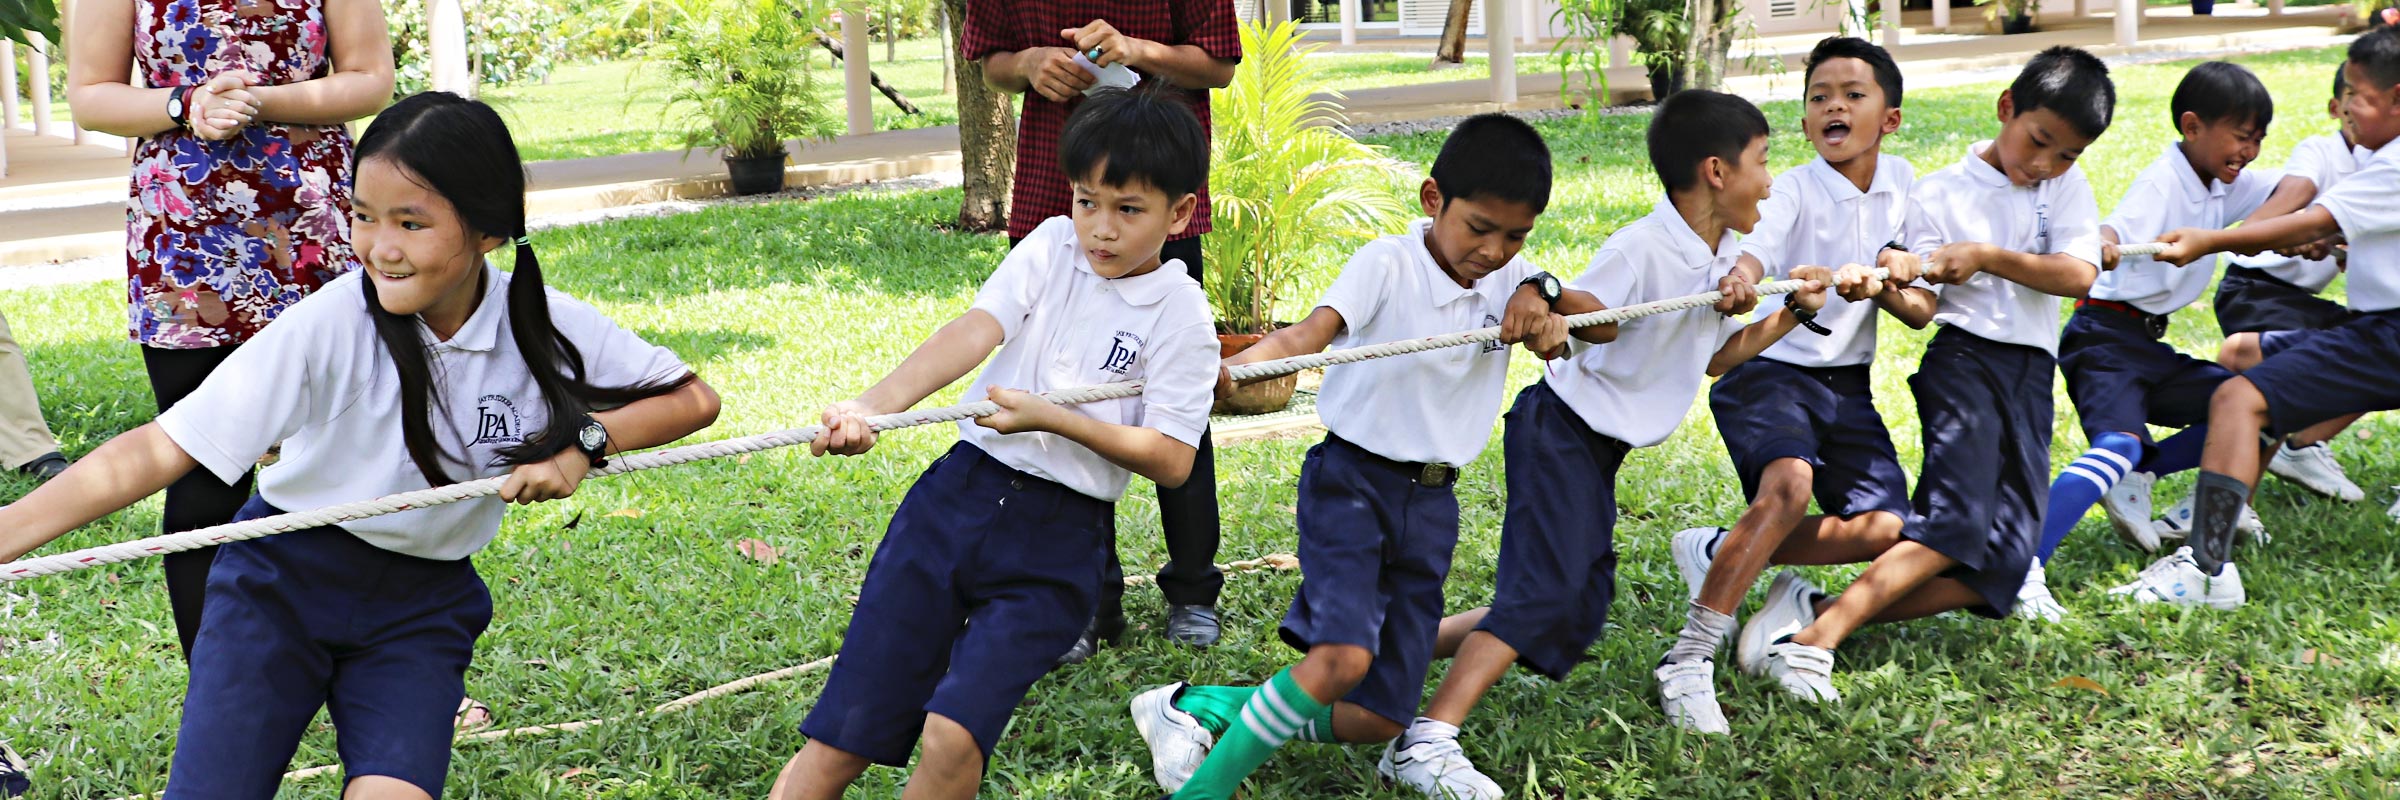 Jay Pritzker Academy, Siem Reap, Cambodia. JPA students playing tug-of-war during Khmer Pchum Ben celebrations at the JPA campus. Jay-Pritzker-Academy-Siem-Reap-Cambodia.